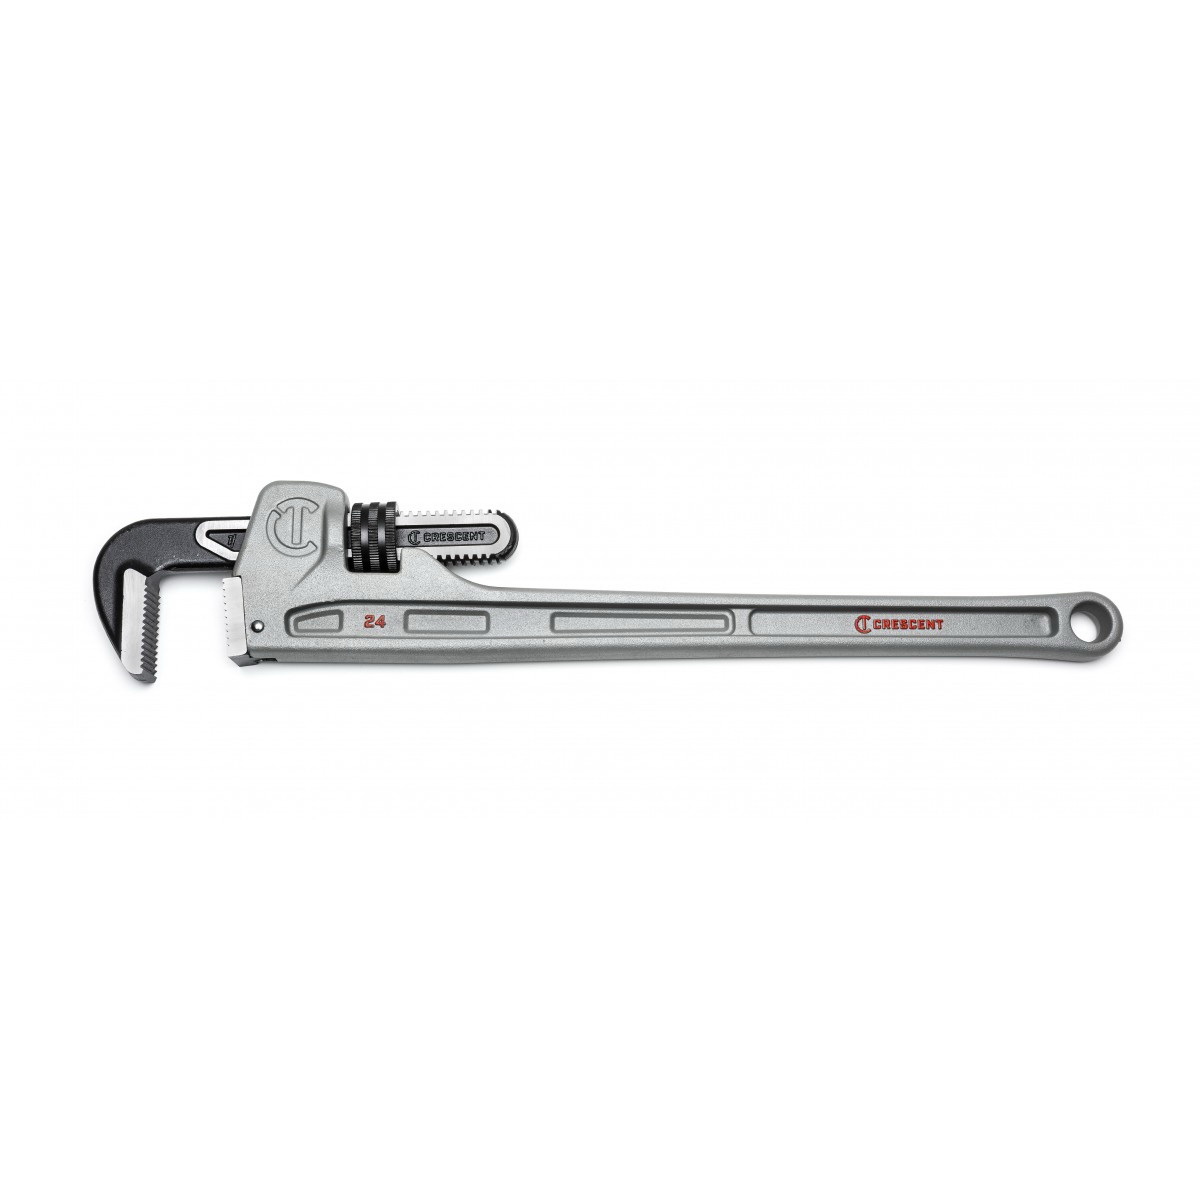 Crescent CAPW24 Pipe Wrench, 0 to 3-1/2 in Jaw, 24 in L, Aluminum, Powder-Coated